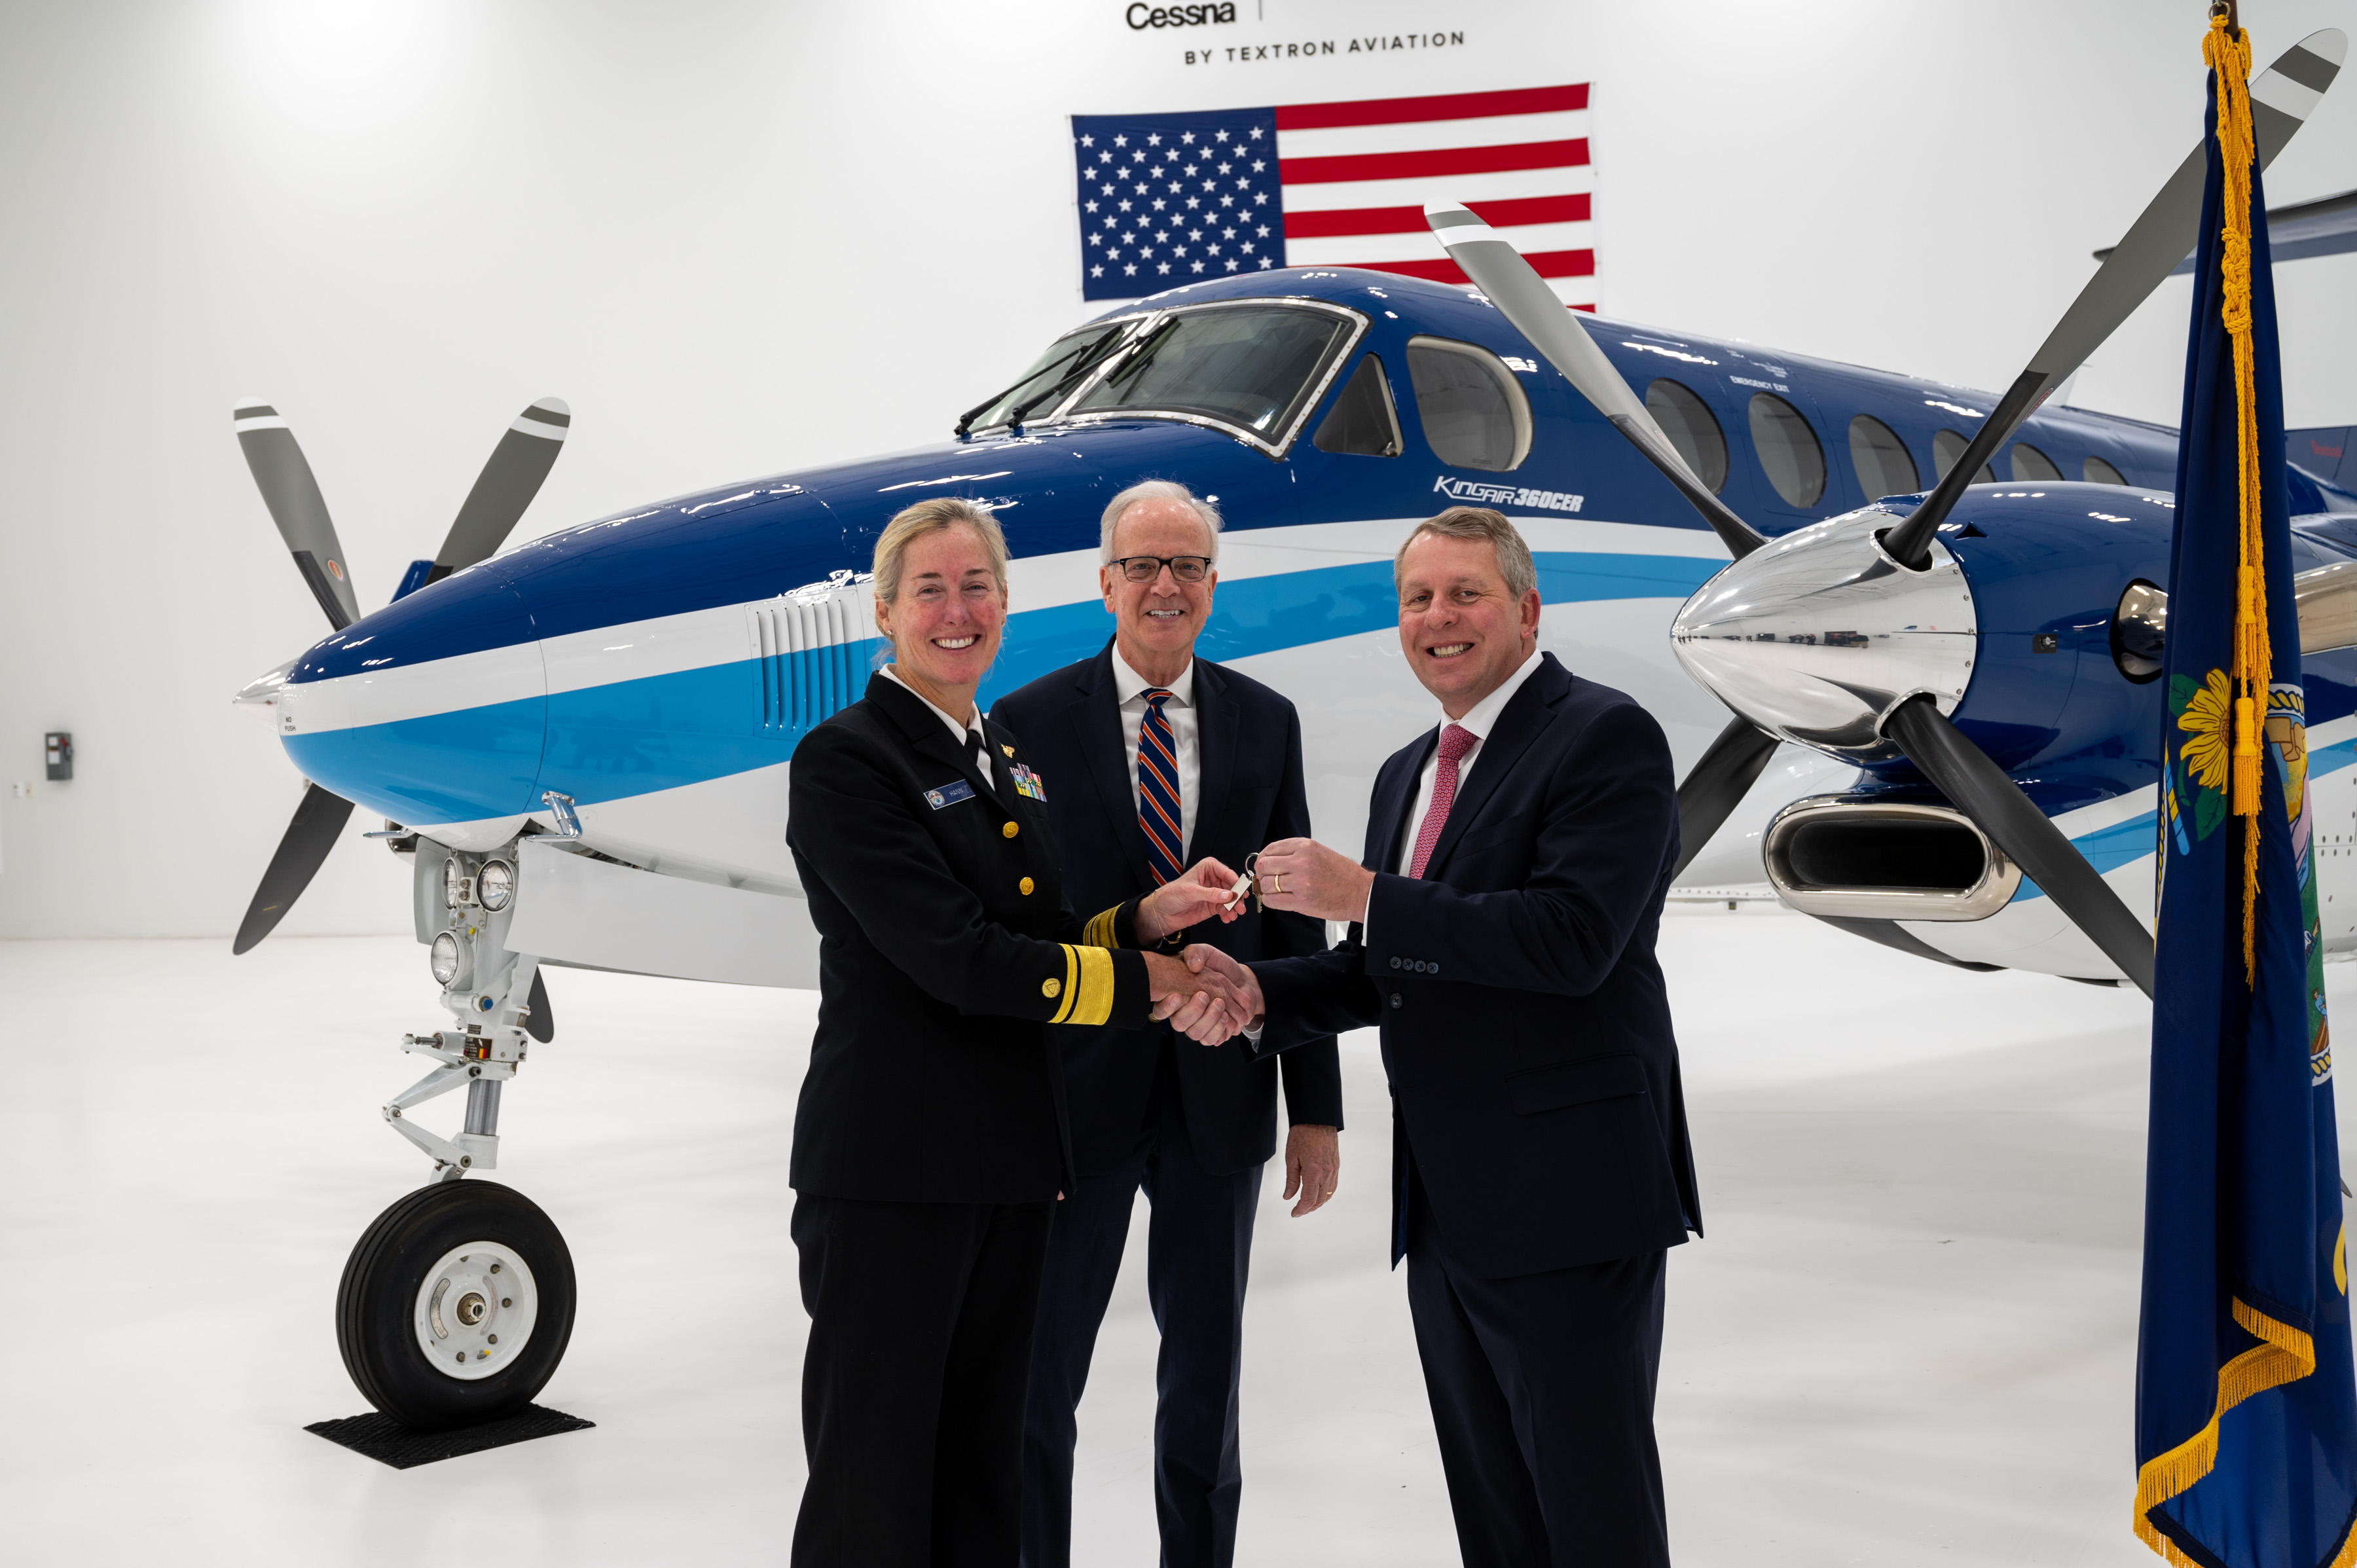 Photo showing Rear Adm. Nancy Hann (left) receives the key to Beechcraft King Air N65RF from Ron Draper (right), president and CEO of Textron Aviation, with Senator Jerry Moran (center). Credit: Textron Aviation